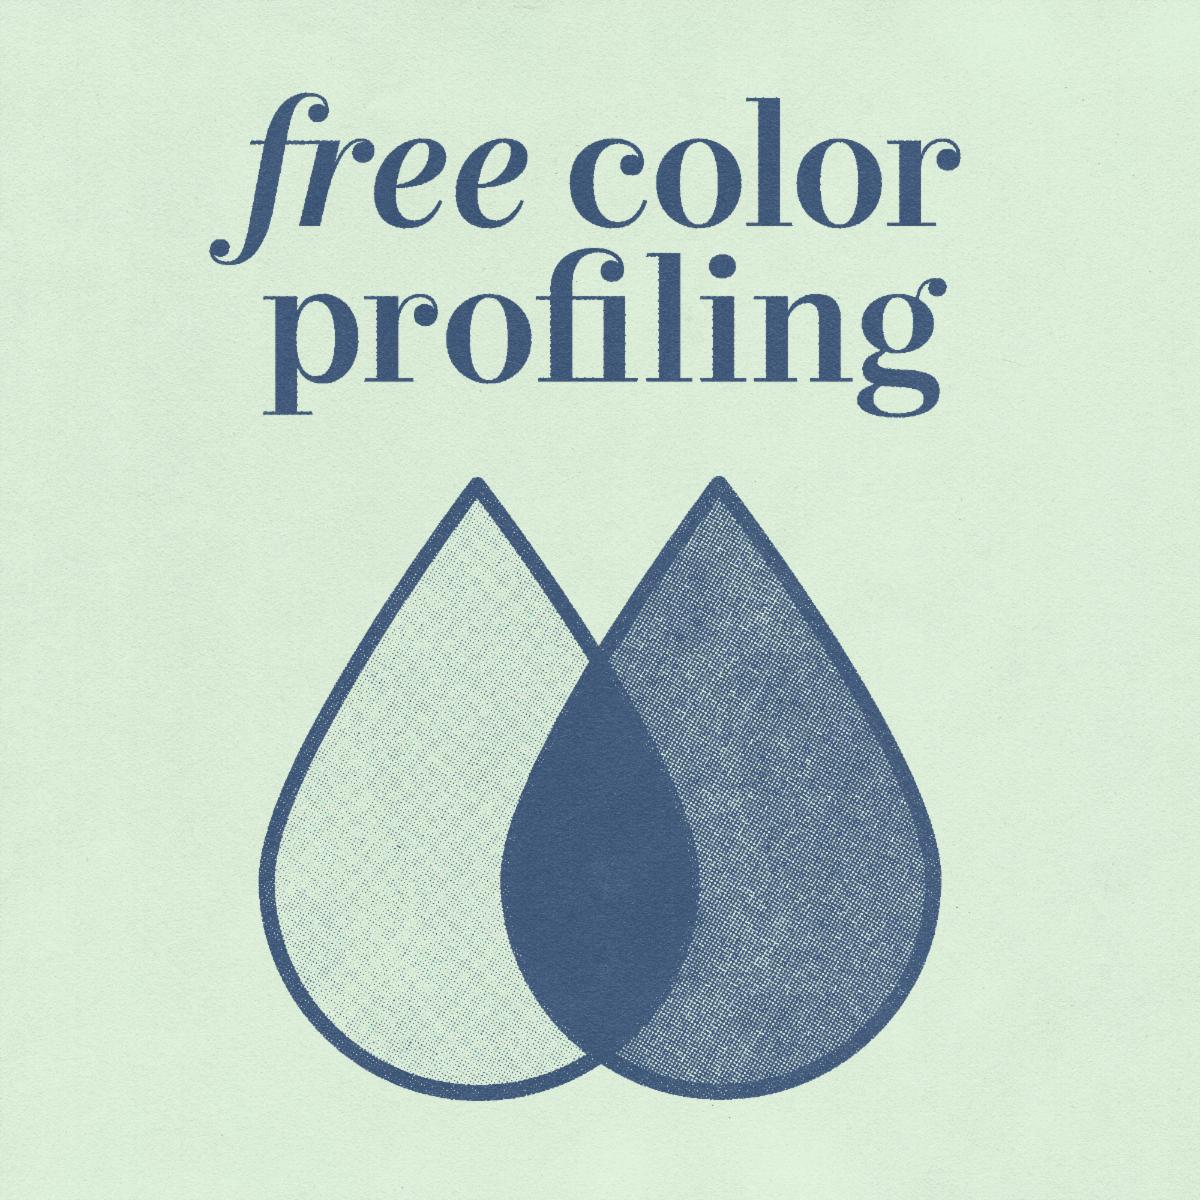 Print Deal free color profiling offer